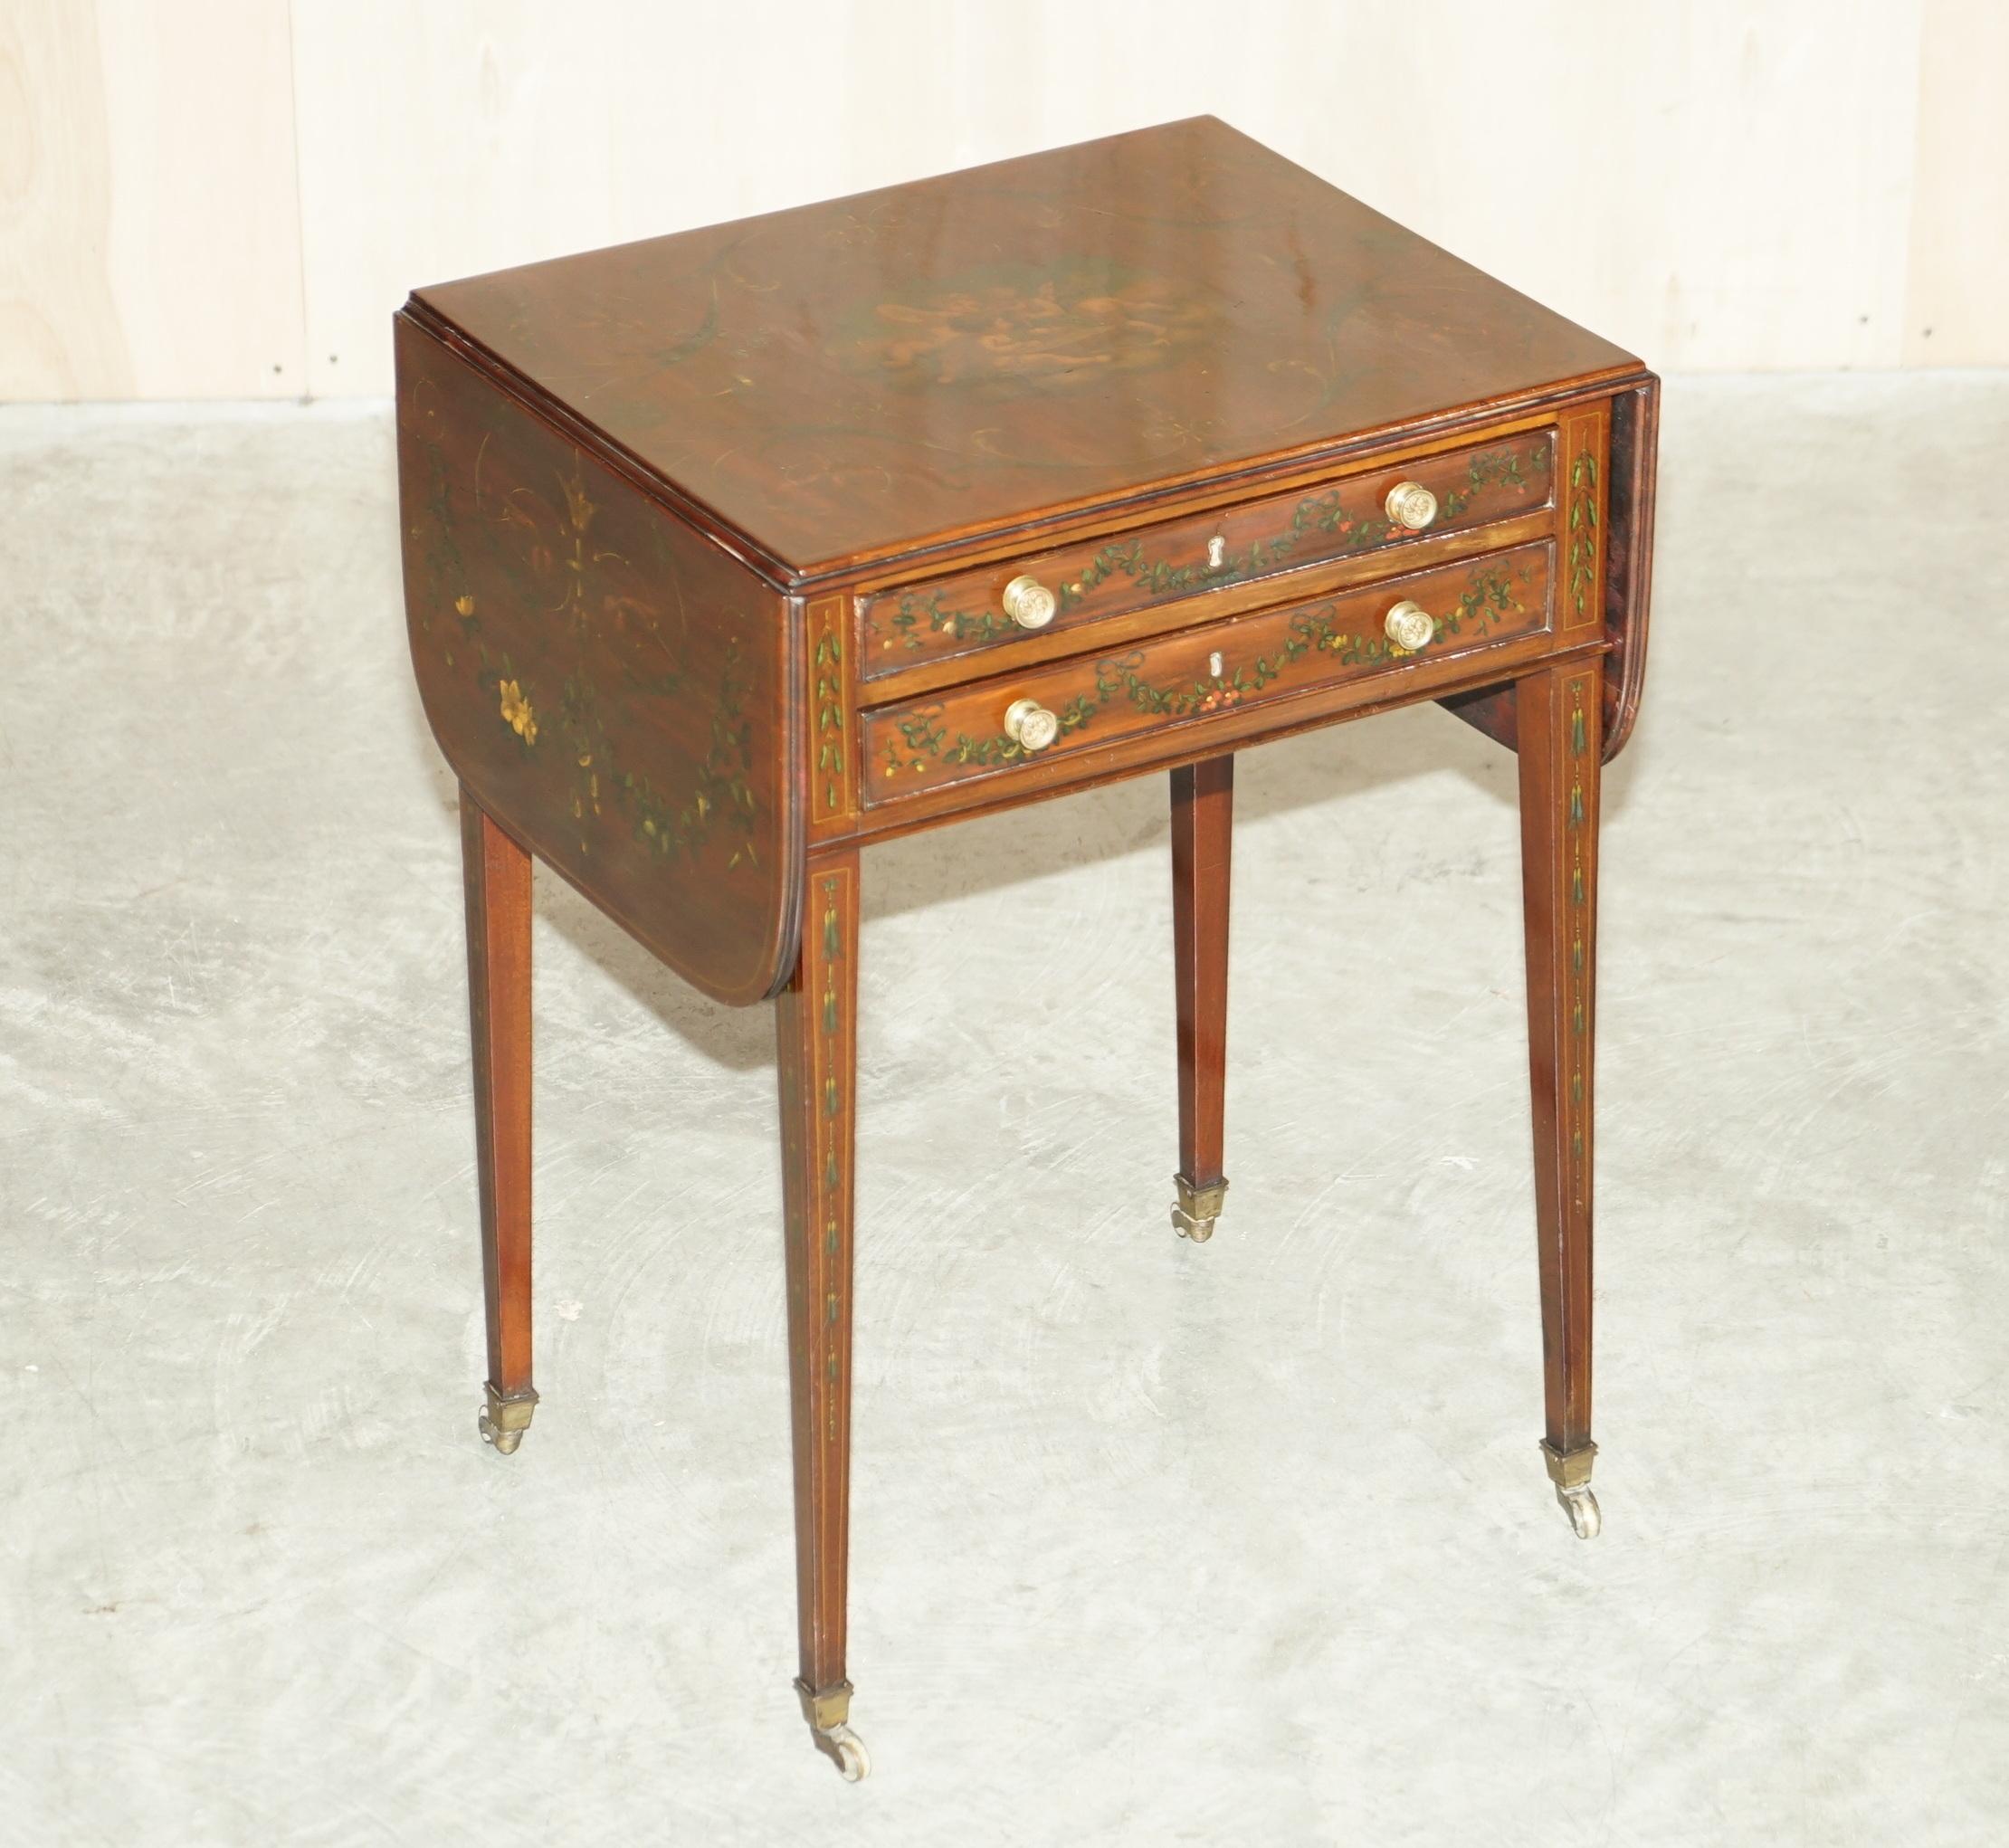 We are delighted to offer for sale this exquisite, hand made in England circa 1815 Regency, Sheraton painted extending side table

What a table, this is pure art furniture from all angles, the piece is dripping in Sheraton paintings with the piece